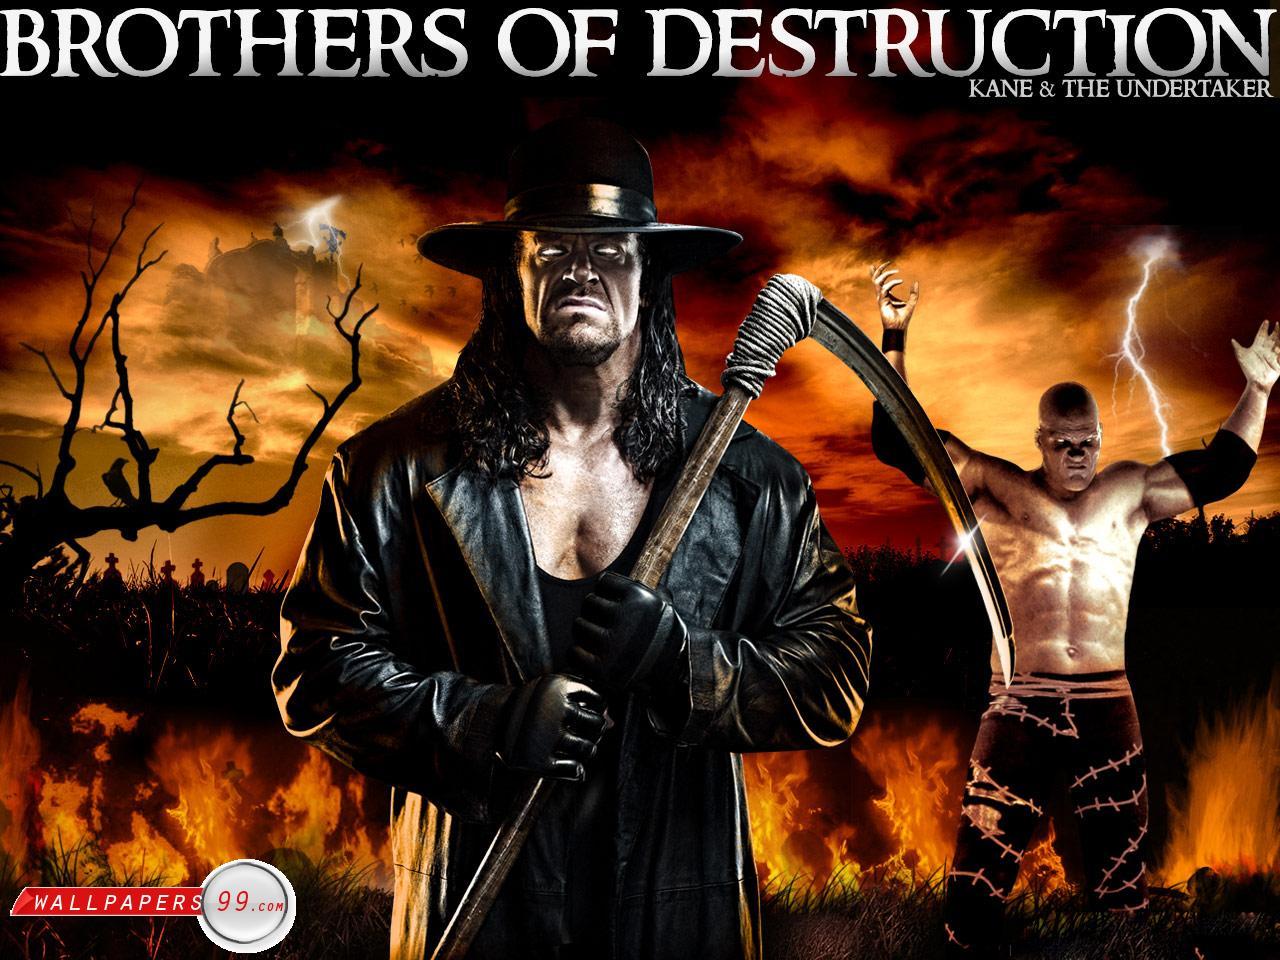 Undertaker image the taker HD wallpaper and background photo